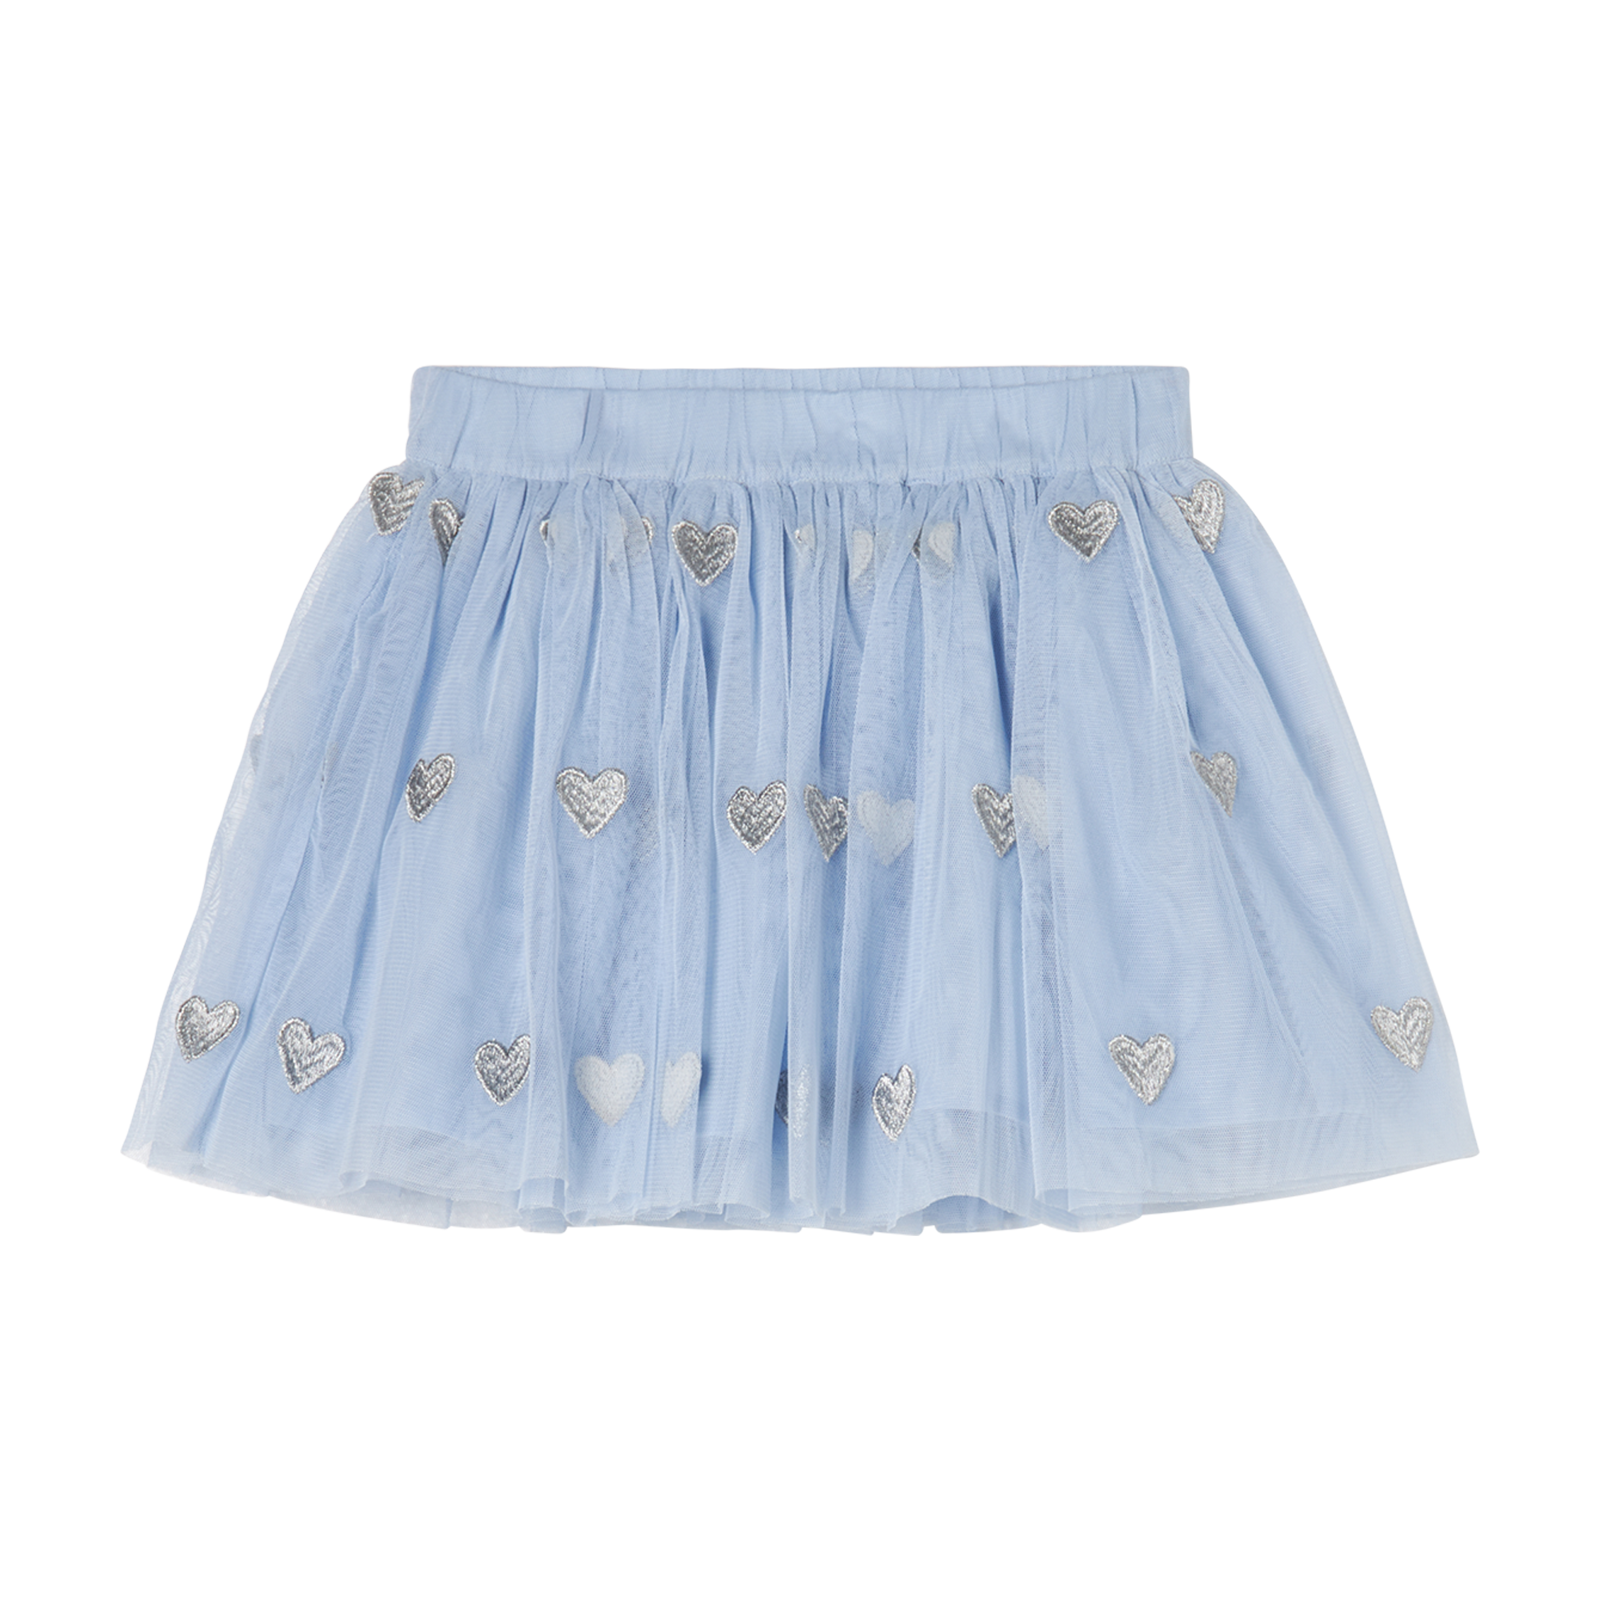 Stella McCartney - Tulle Skirt with Sequin Hearts